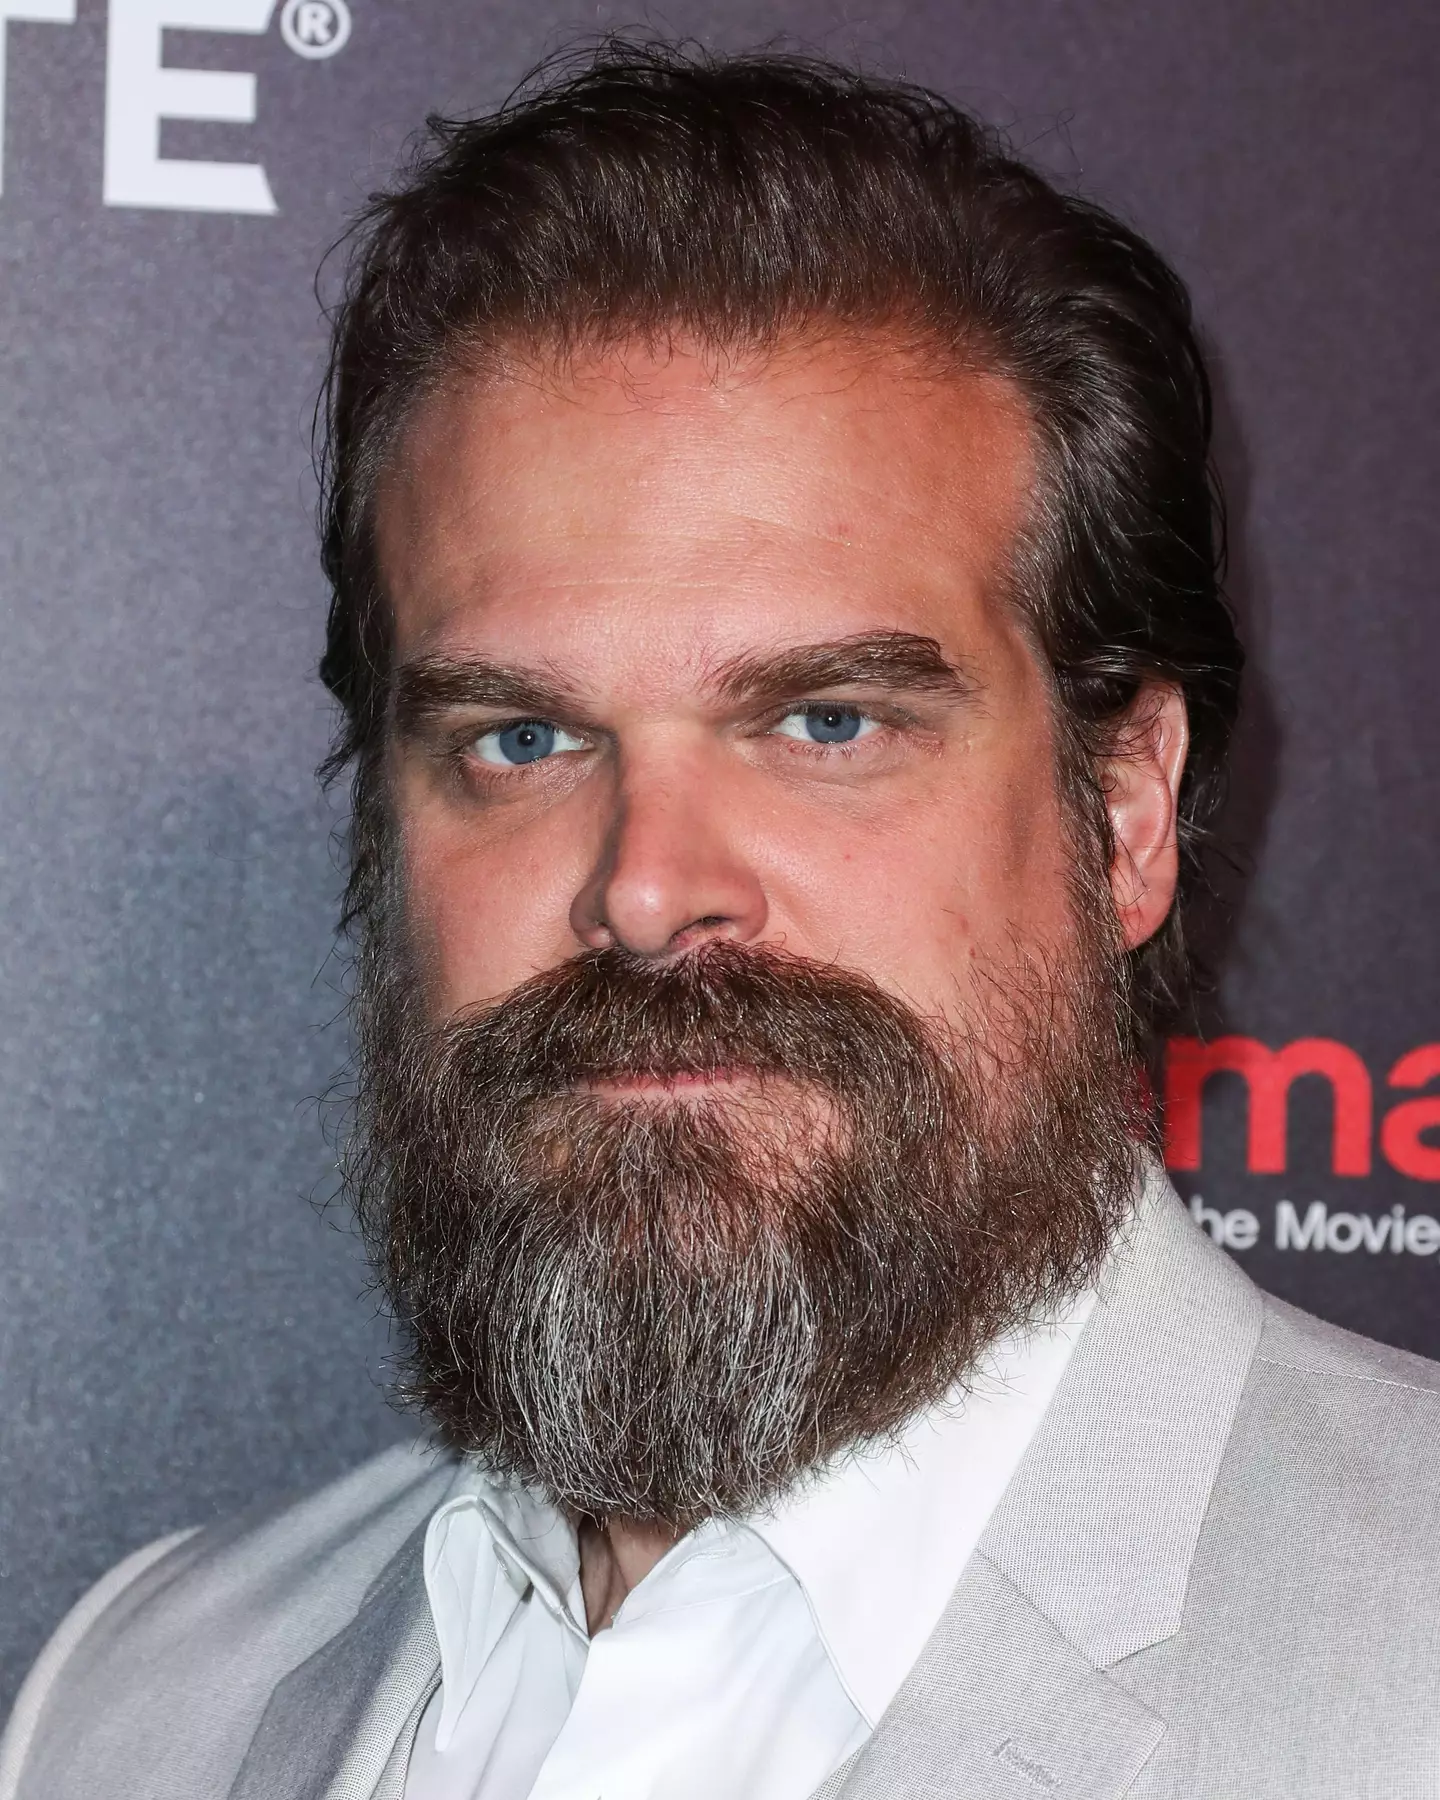 David Harbour says method acting is 'silly' and 'dangerous'.